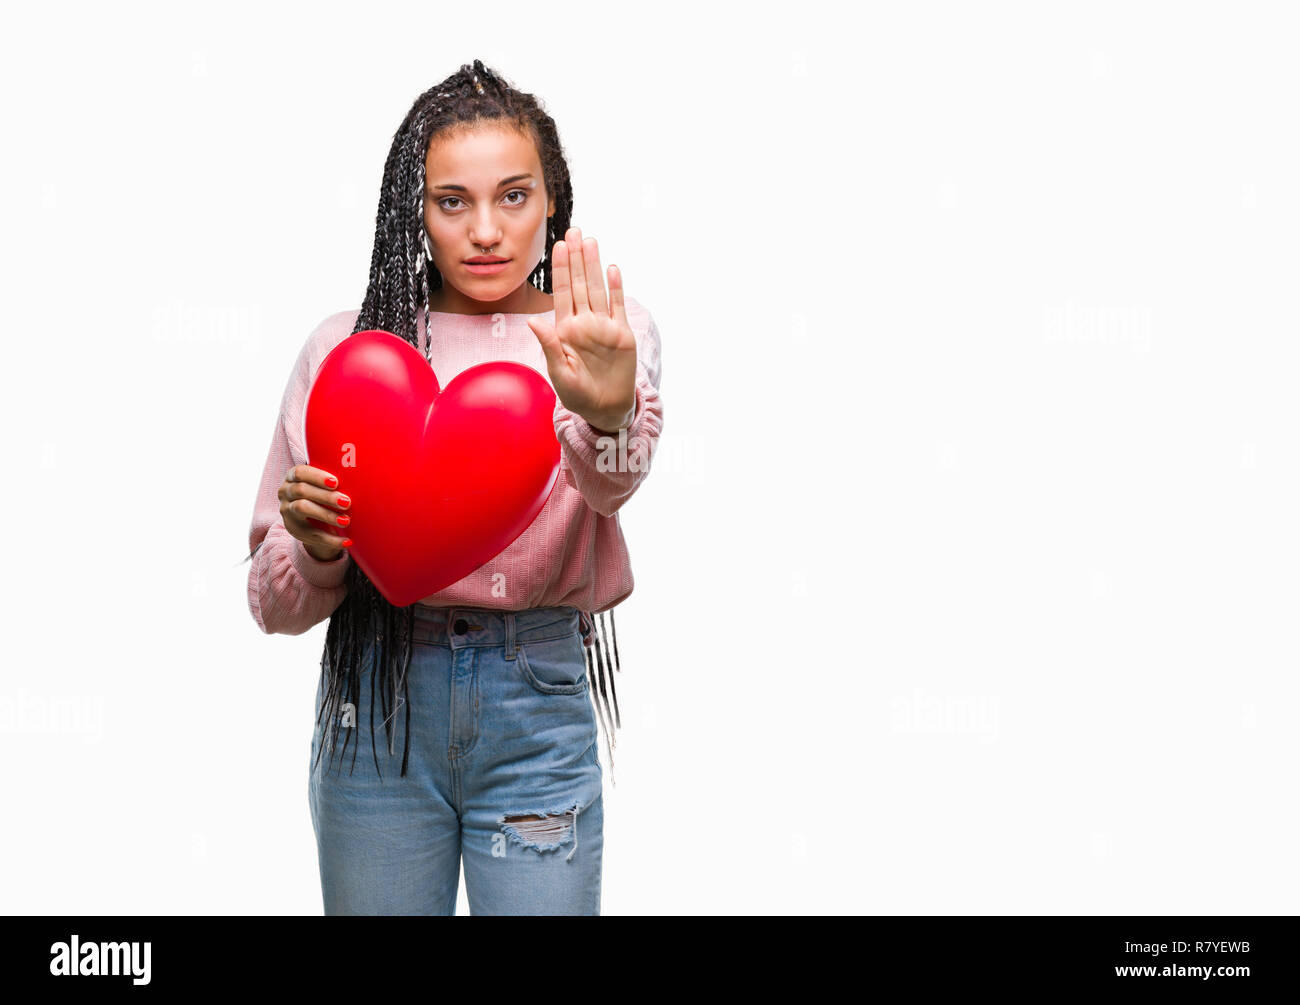 Young braided hair african american girl holding read heart over isolated background with open hand doing stop sign with serious and confident express Stock Photo